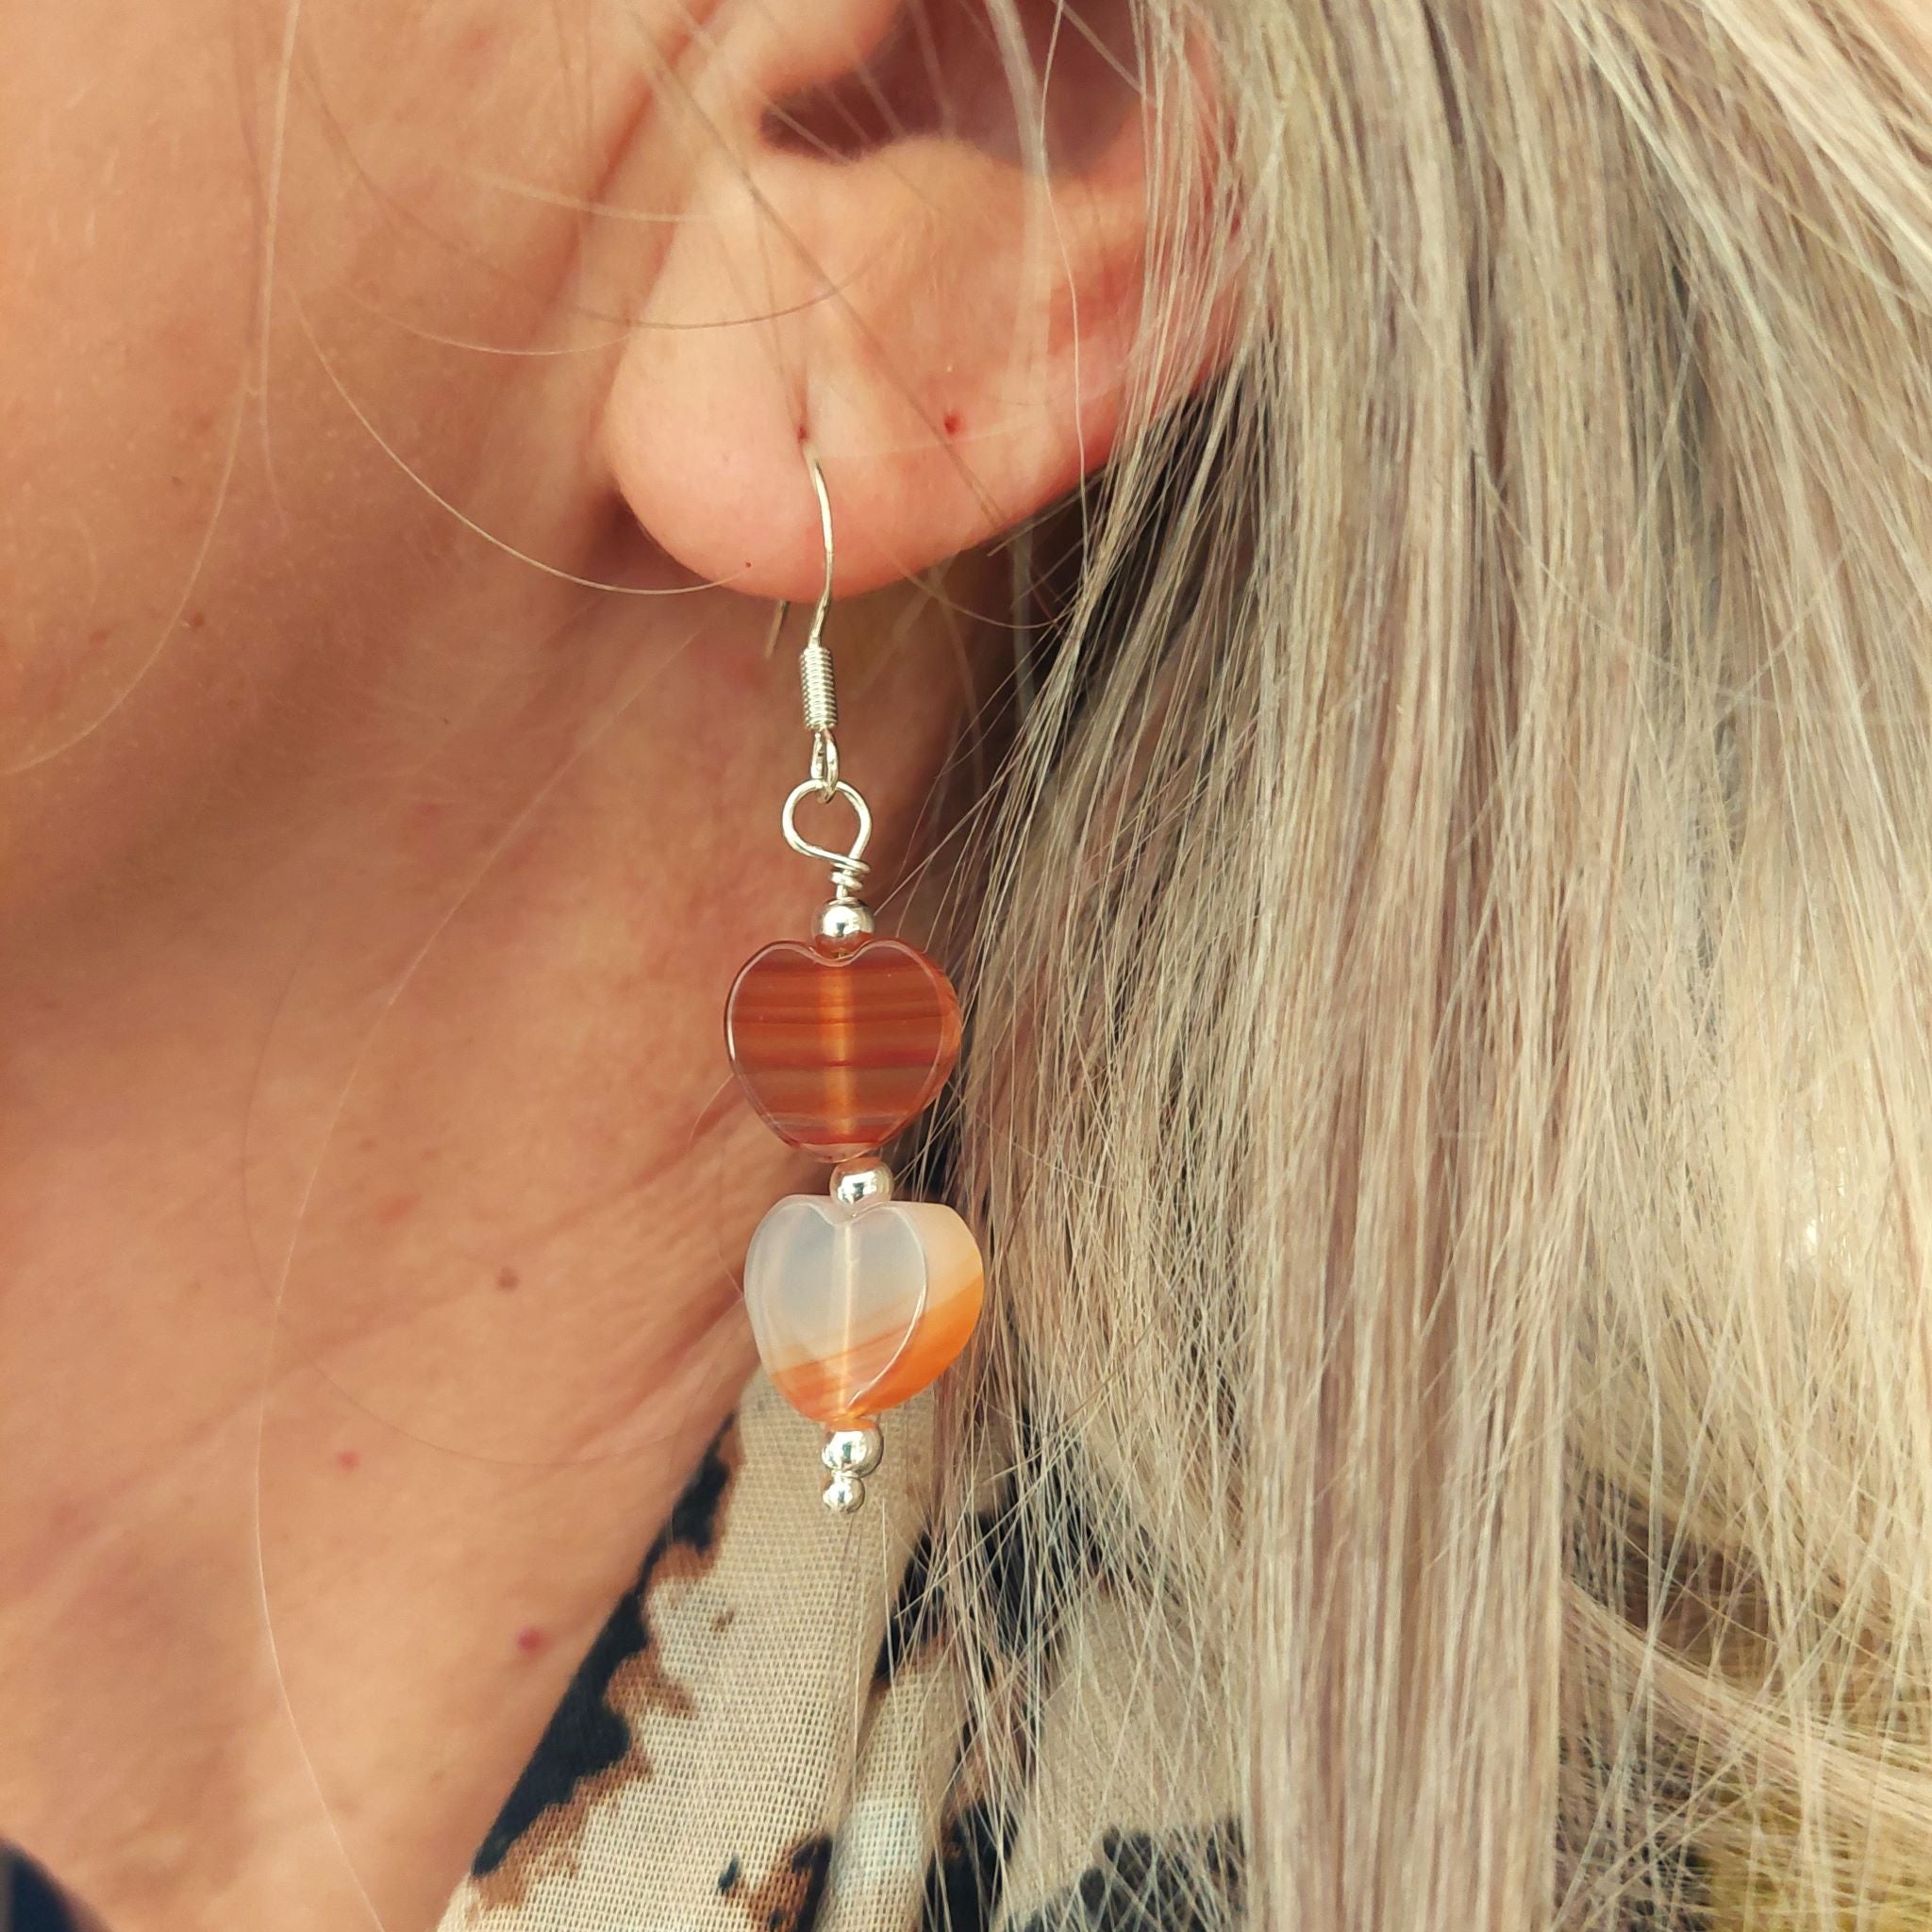 Lovely Handmade Stone Heart earrings in amber tones with sterling silver beads  Each pair is slightly different due to the nature of the beads  925 Sterling Silver Hook  Length 30mm from bottom of hook  Perfect addition to your winter outfits!